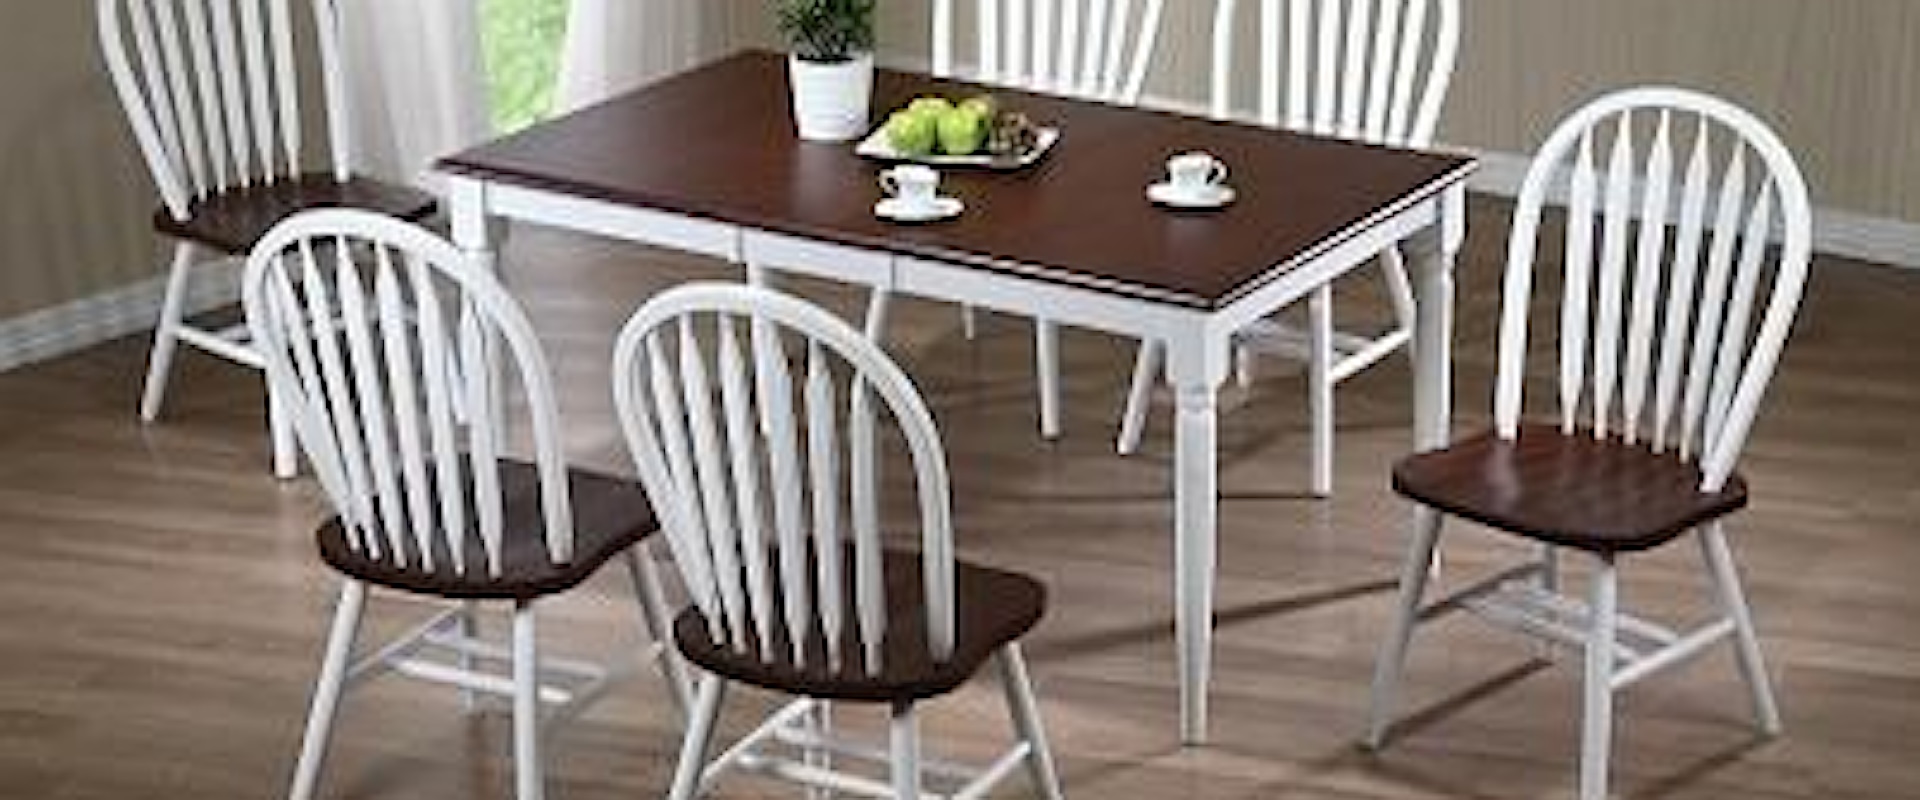 36x48x60  Solid Hardwood Butterfly Leaf Table with 6 windsor chairs